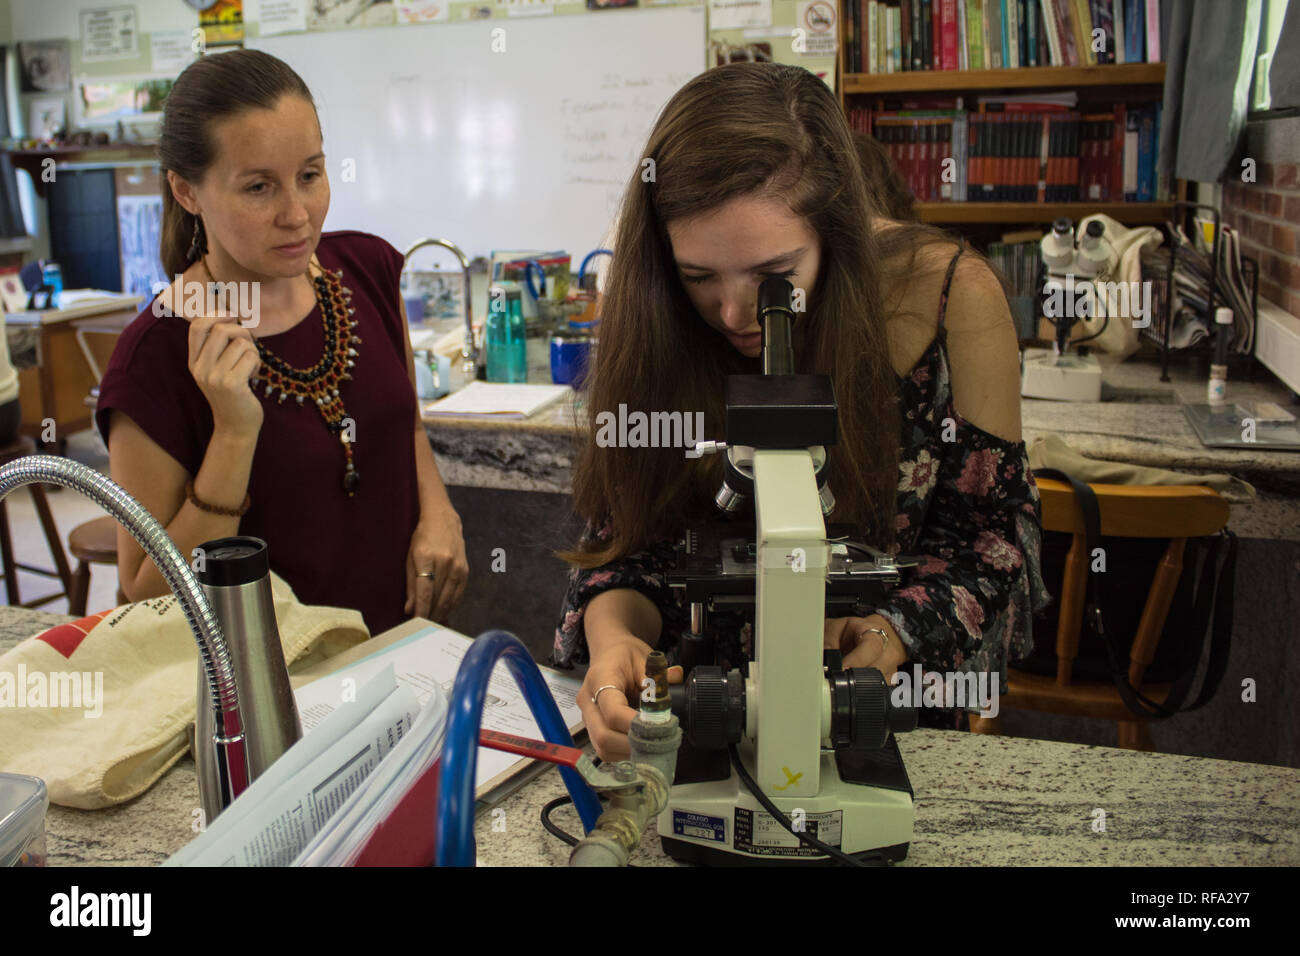 A female biology teacher observing an international student looking through microscope in a science class. Stock Photo